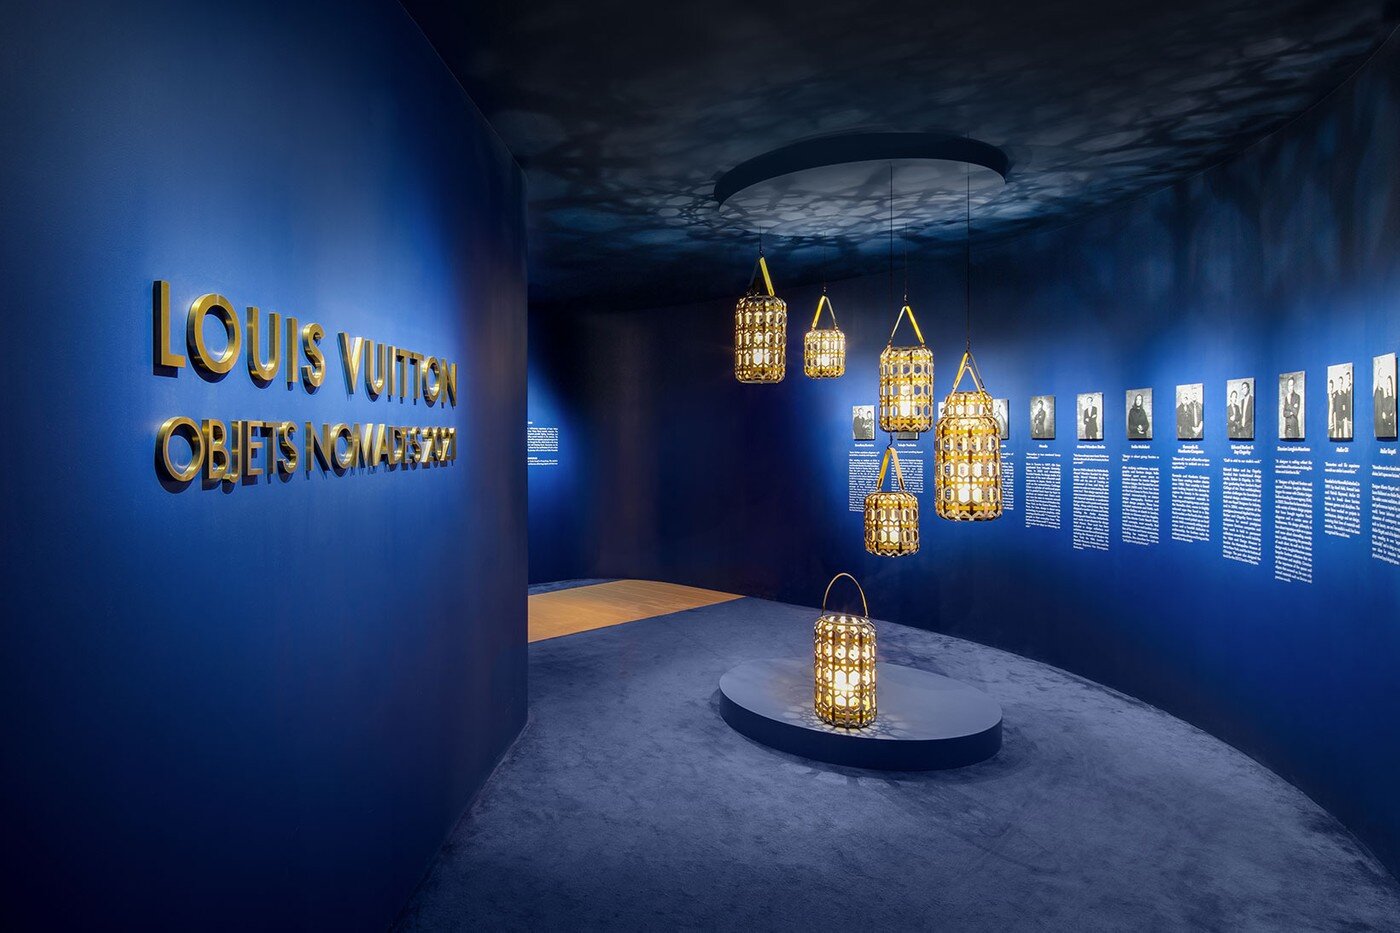 A Look Inside Louis Vuitton's Objets Nomades Exhibition in Hong Kong —  Chris Frank